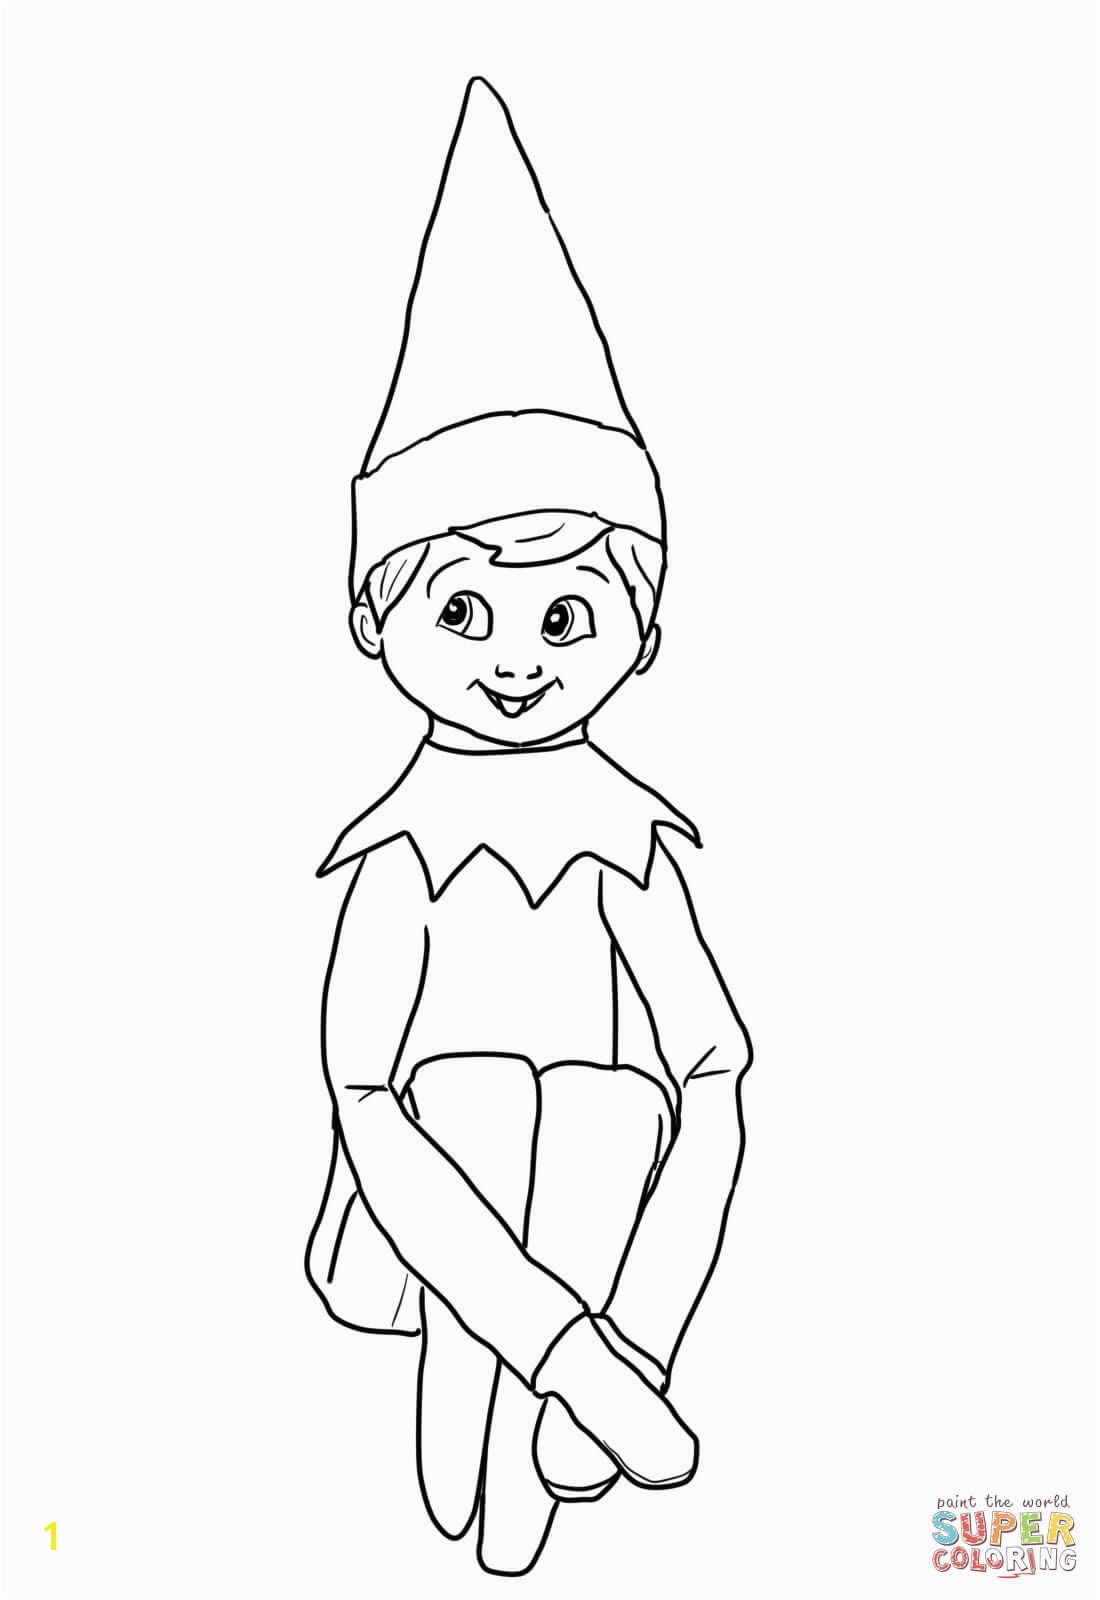 Elf Movie Coloring Pages Lovely Elf the Shelf Coloring Pages Coloring Pages